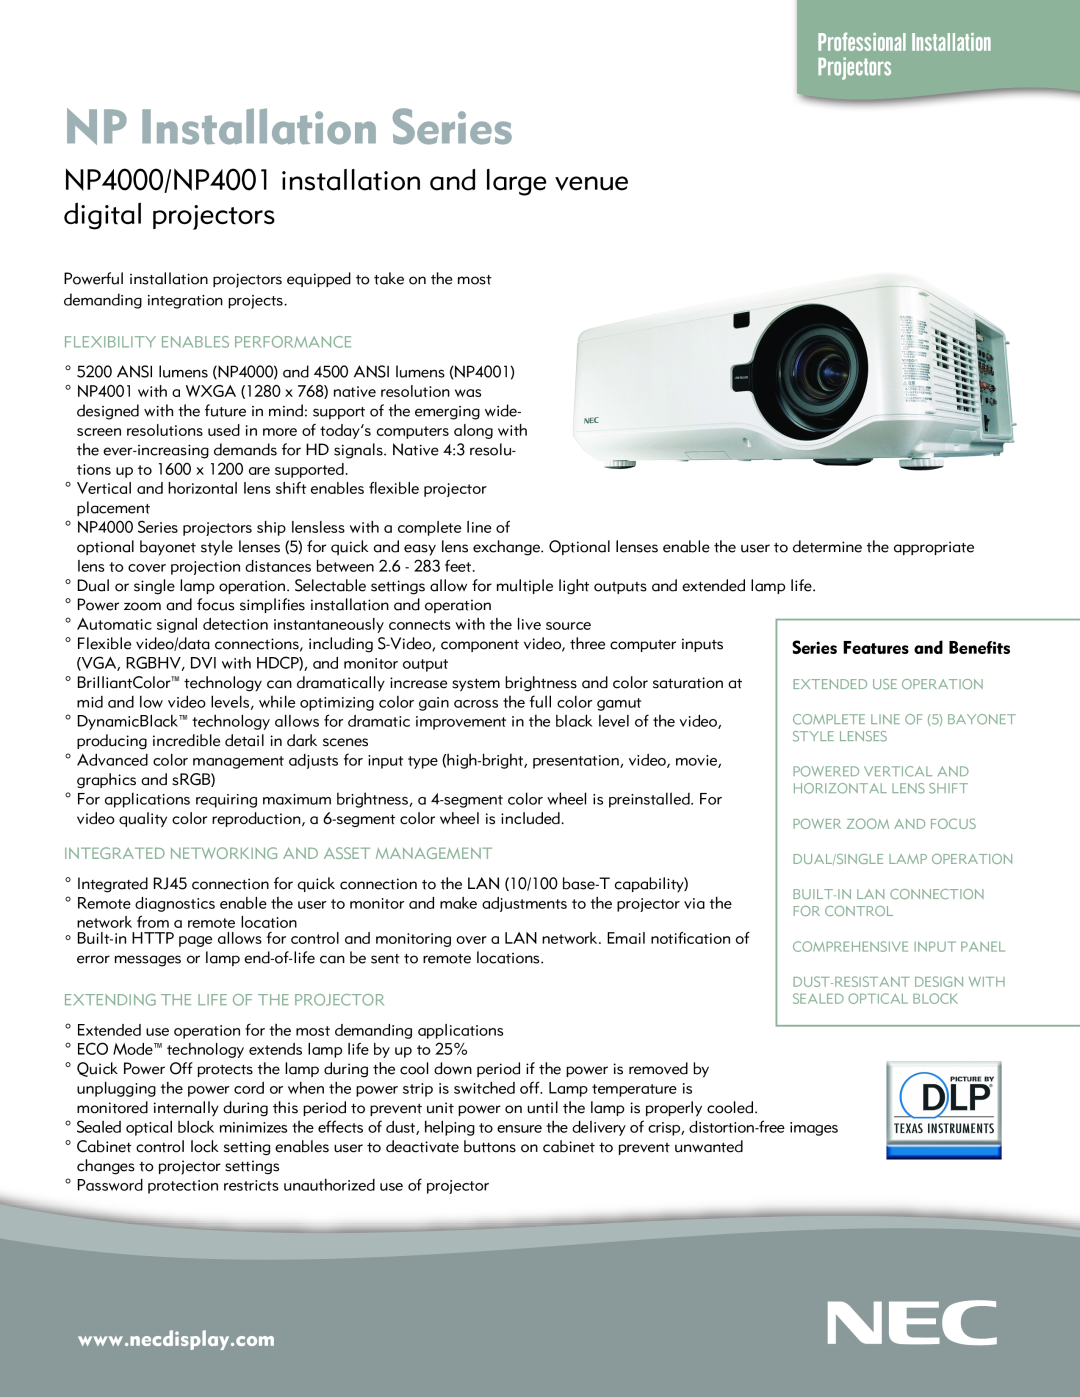 NEC manual NP Installation Series, NP4000/NP4001 installation and large venue digital projectors 